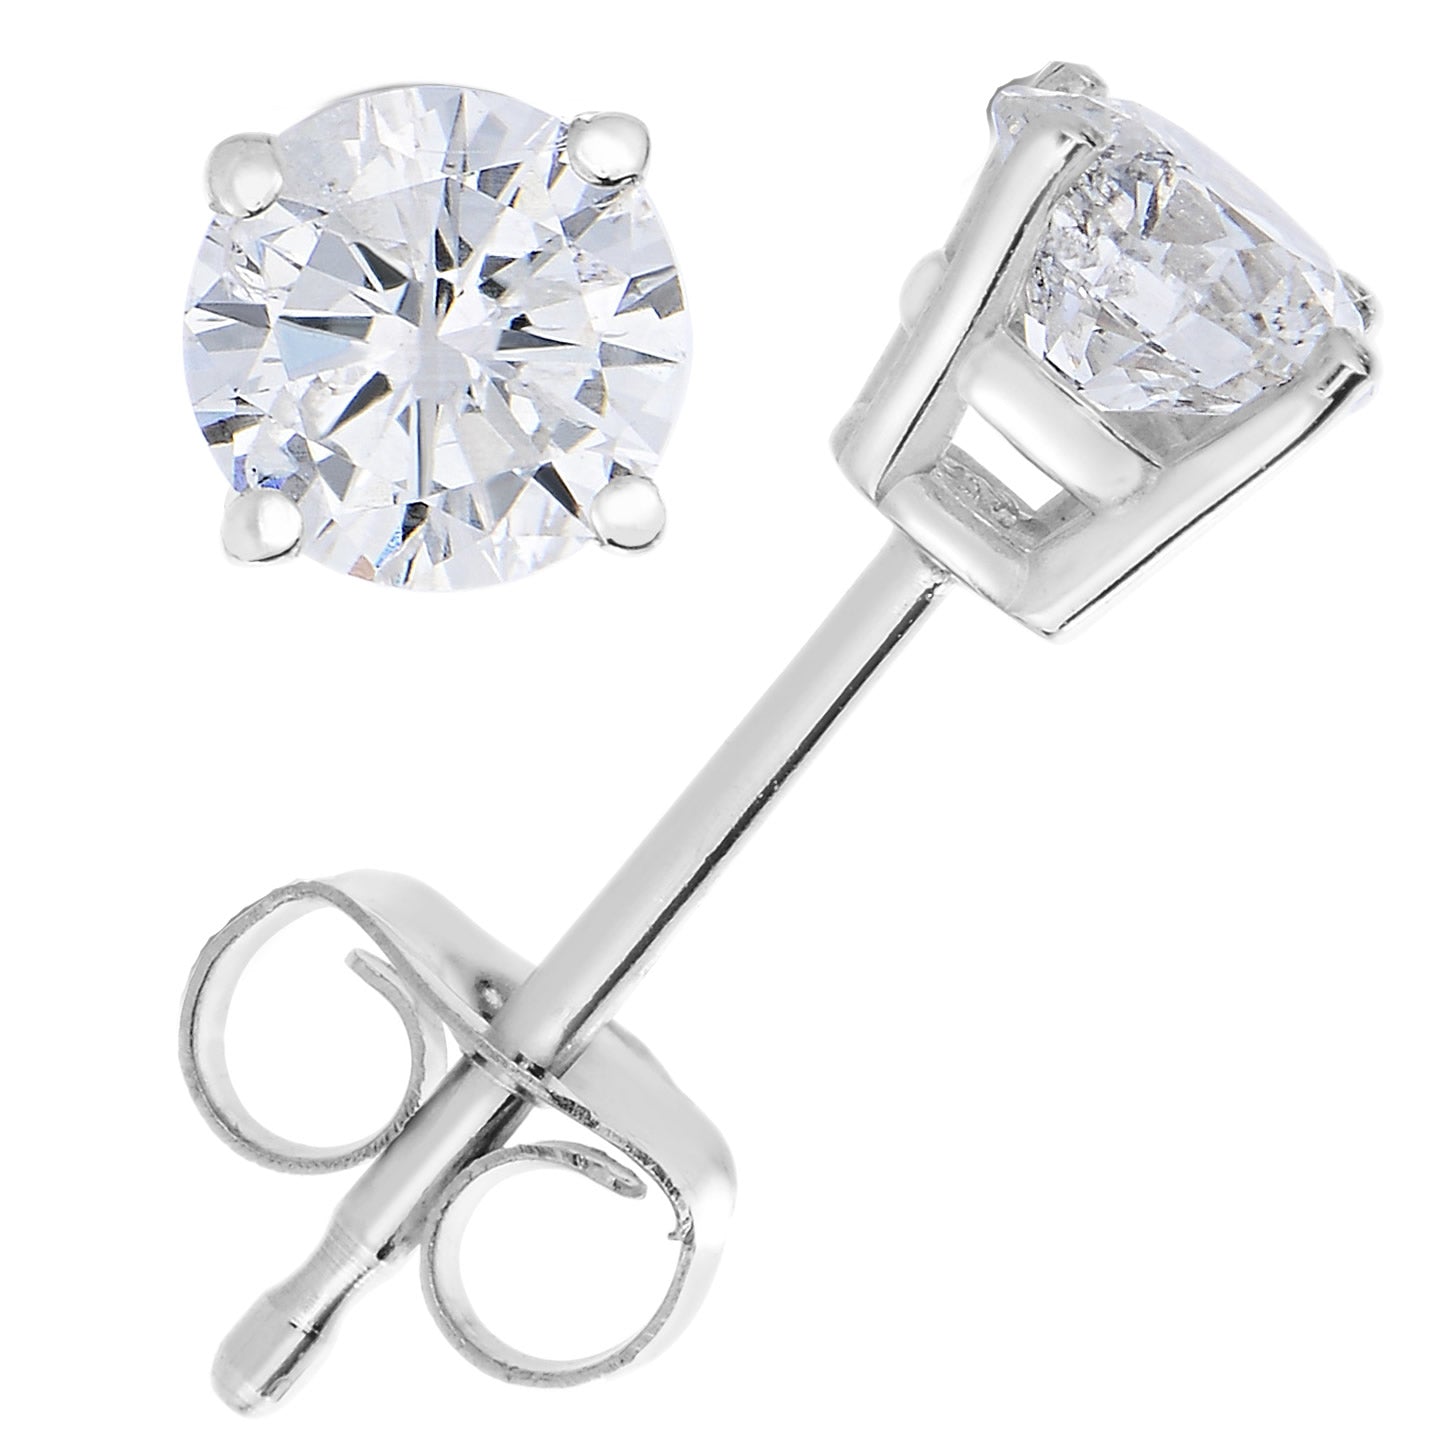 Lab Grown Diamond Stud Earrings 14K White Gold VS1 Clarity H-I Color Round